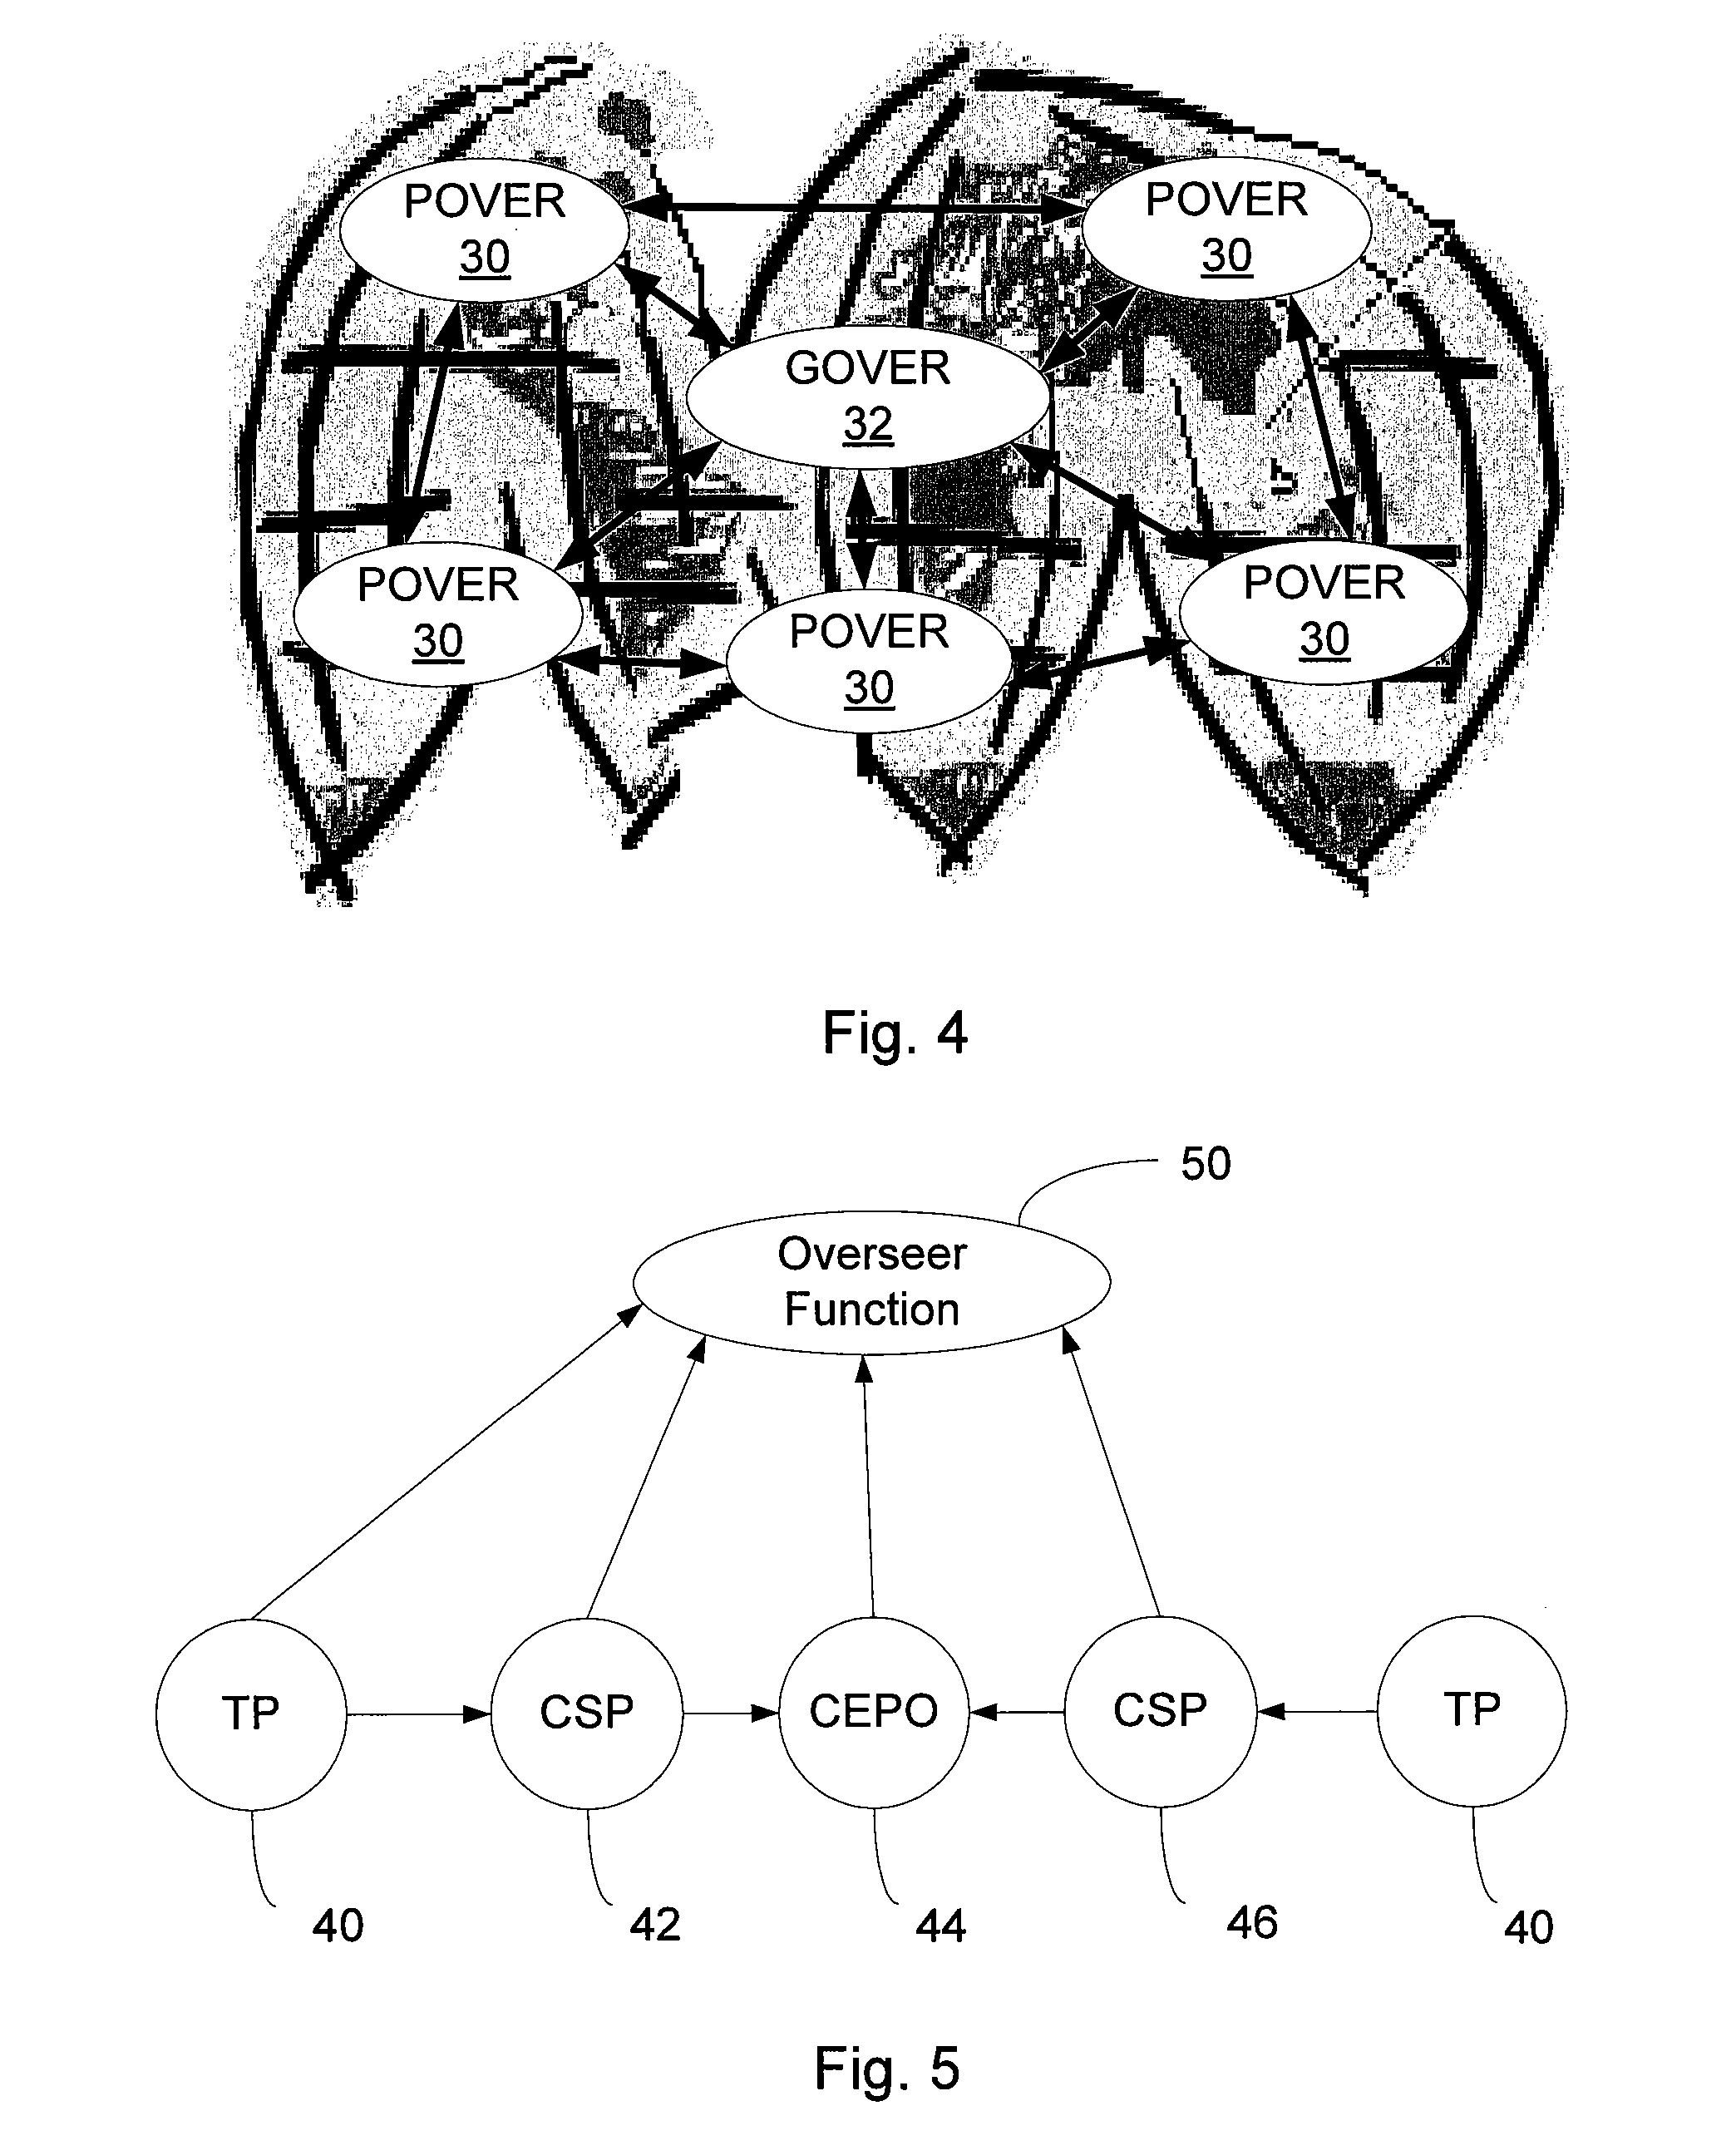 System and Method for Interconnecting Multiple Virtual Private Networks